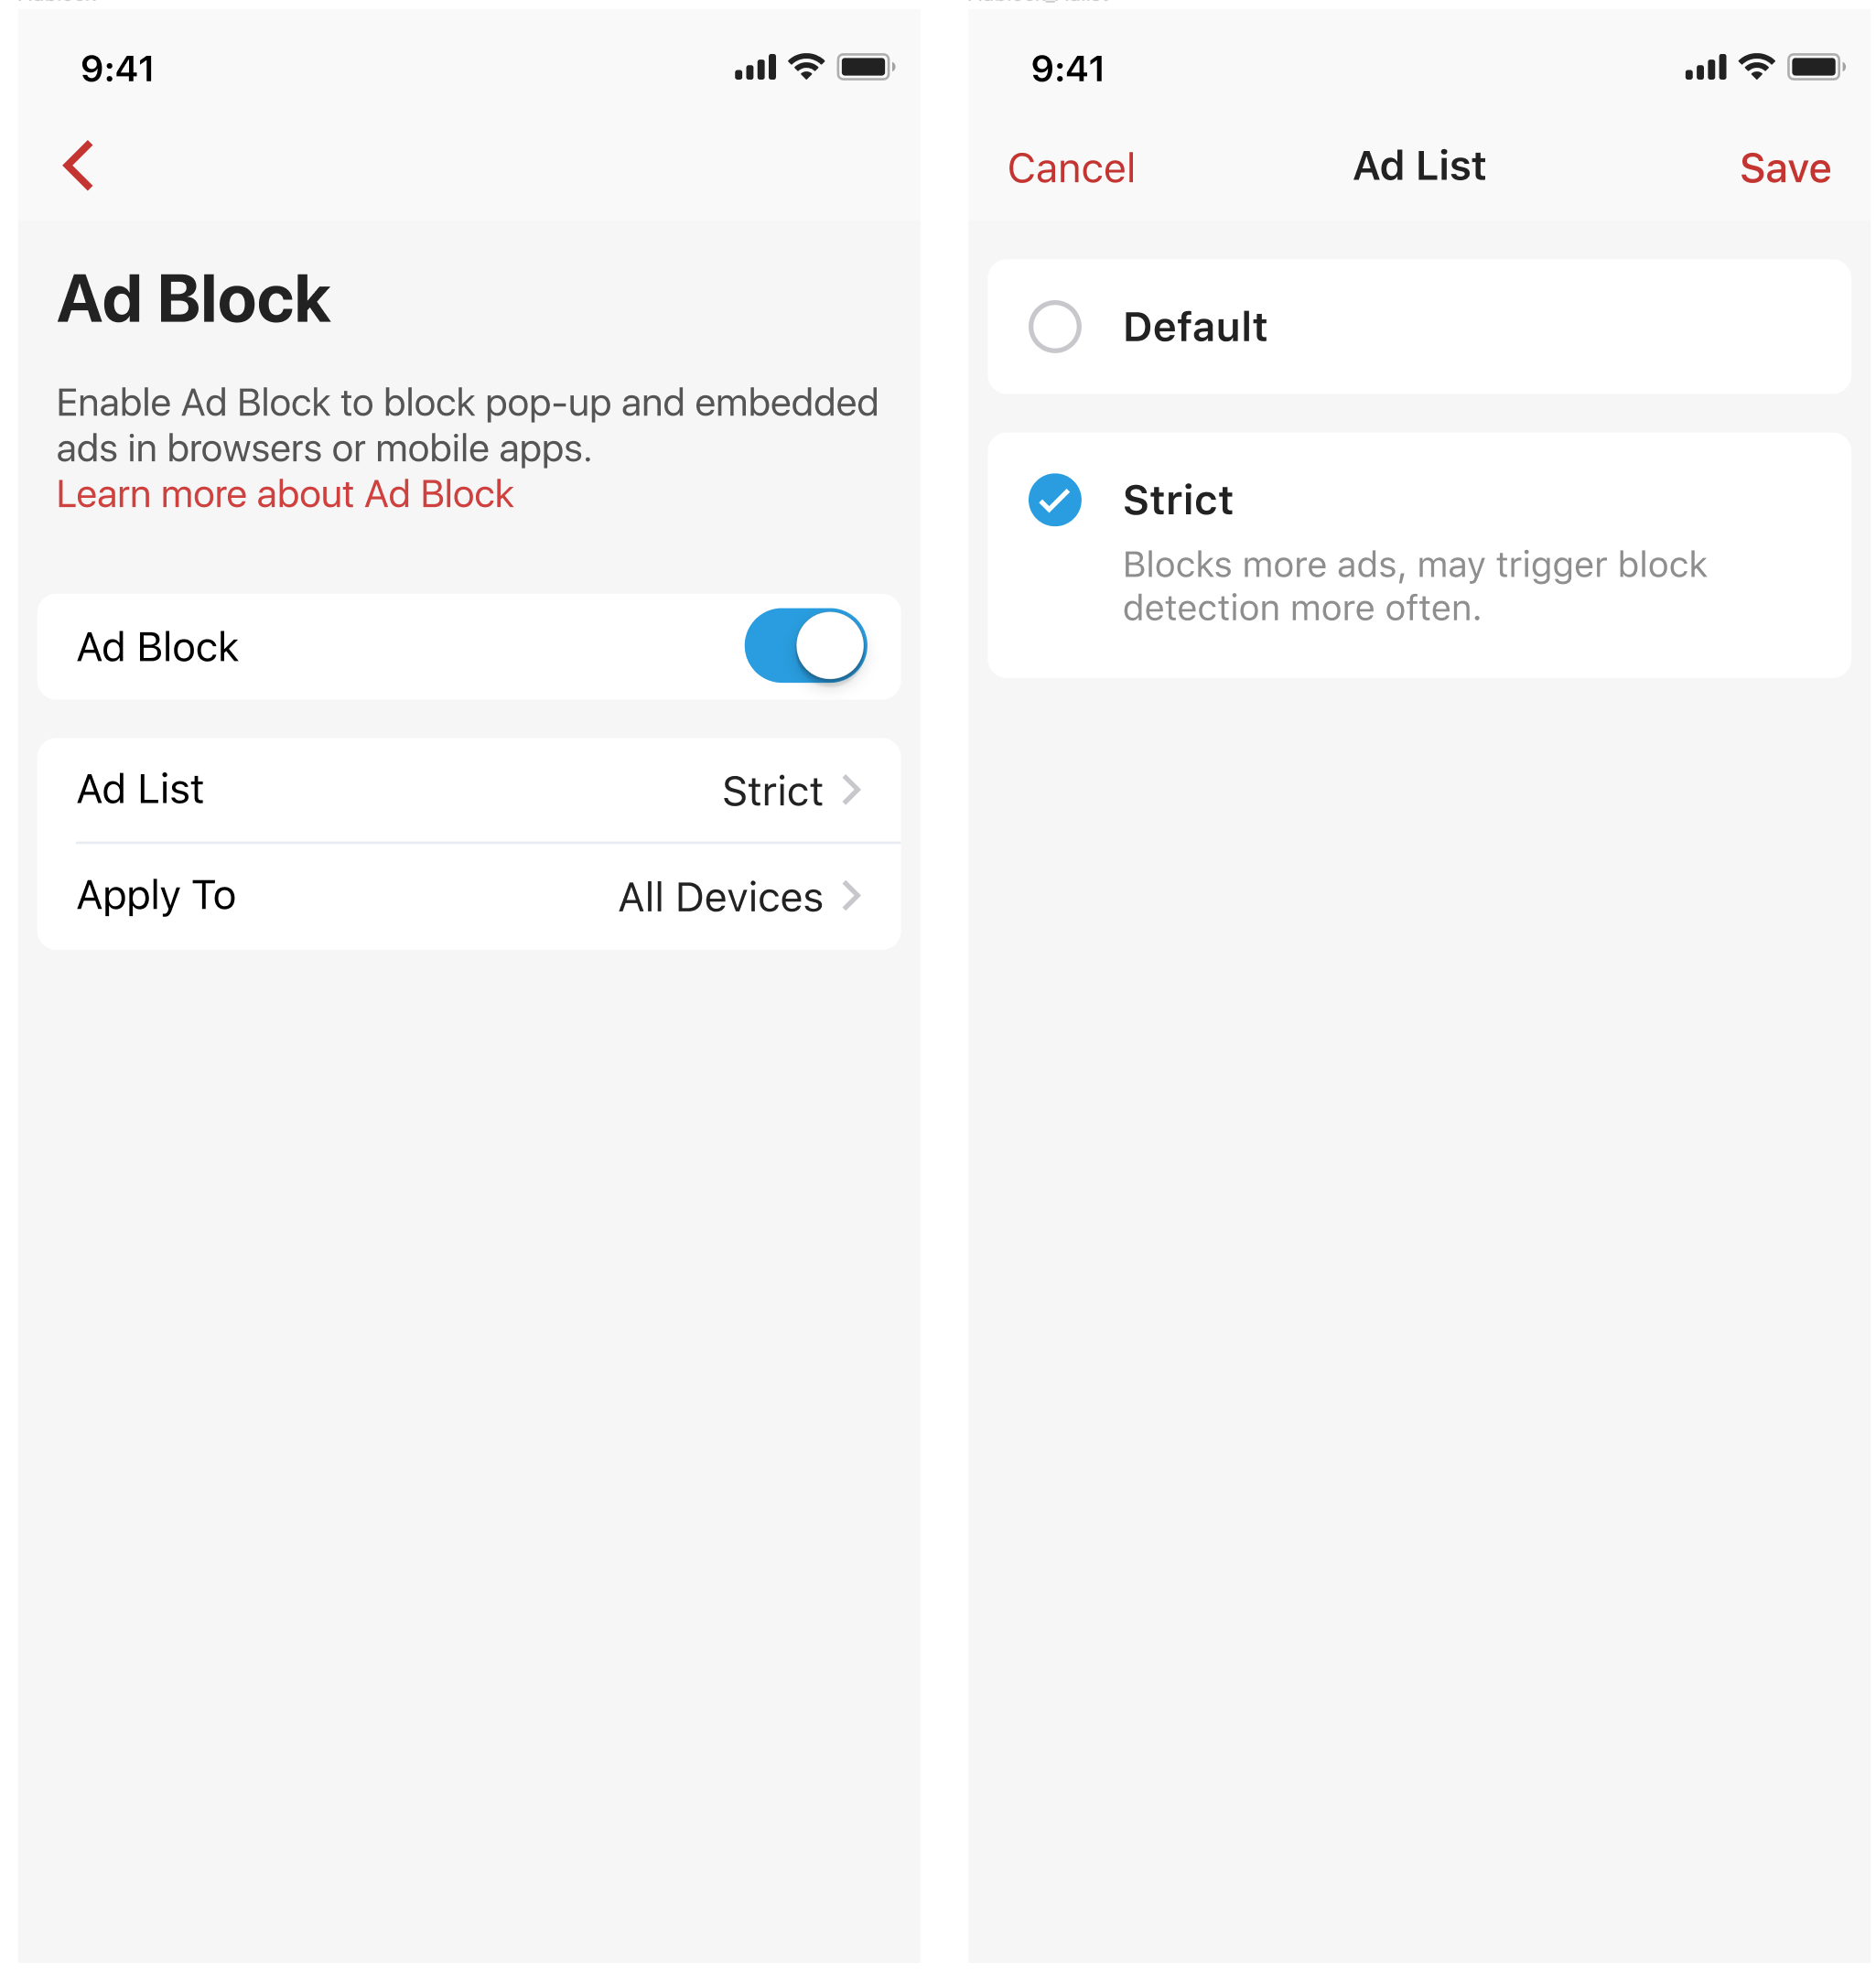 Firewalla's ad block feature turns on with just a tap